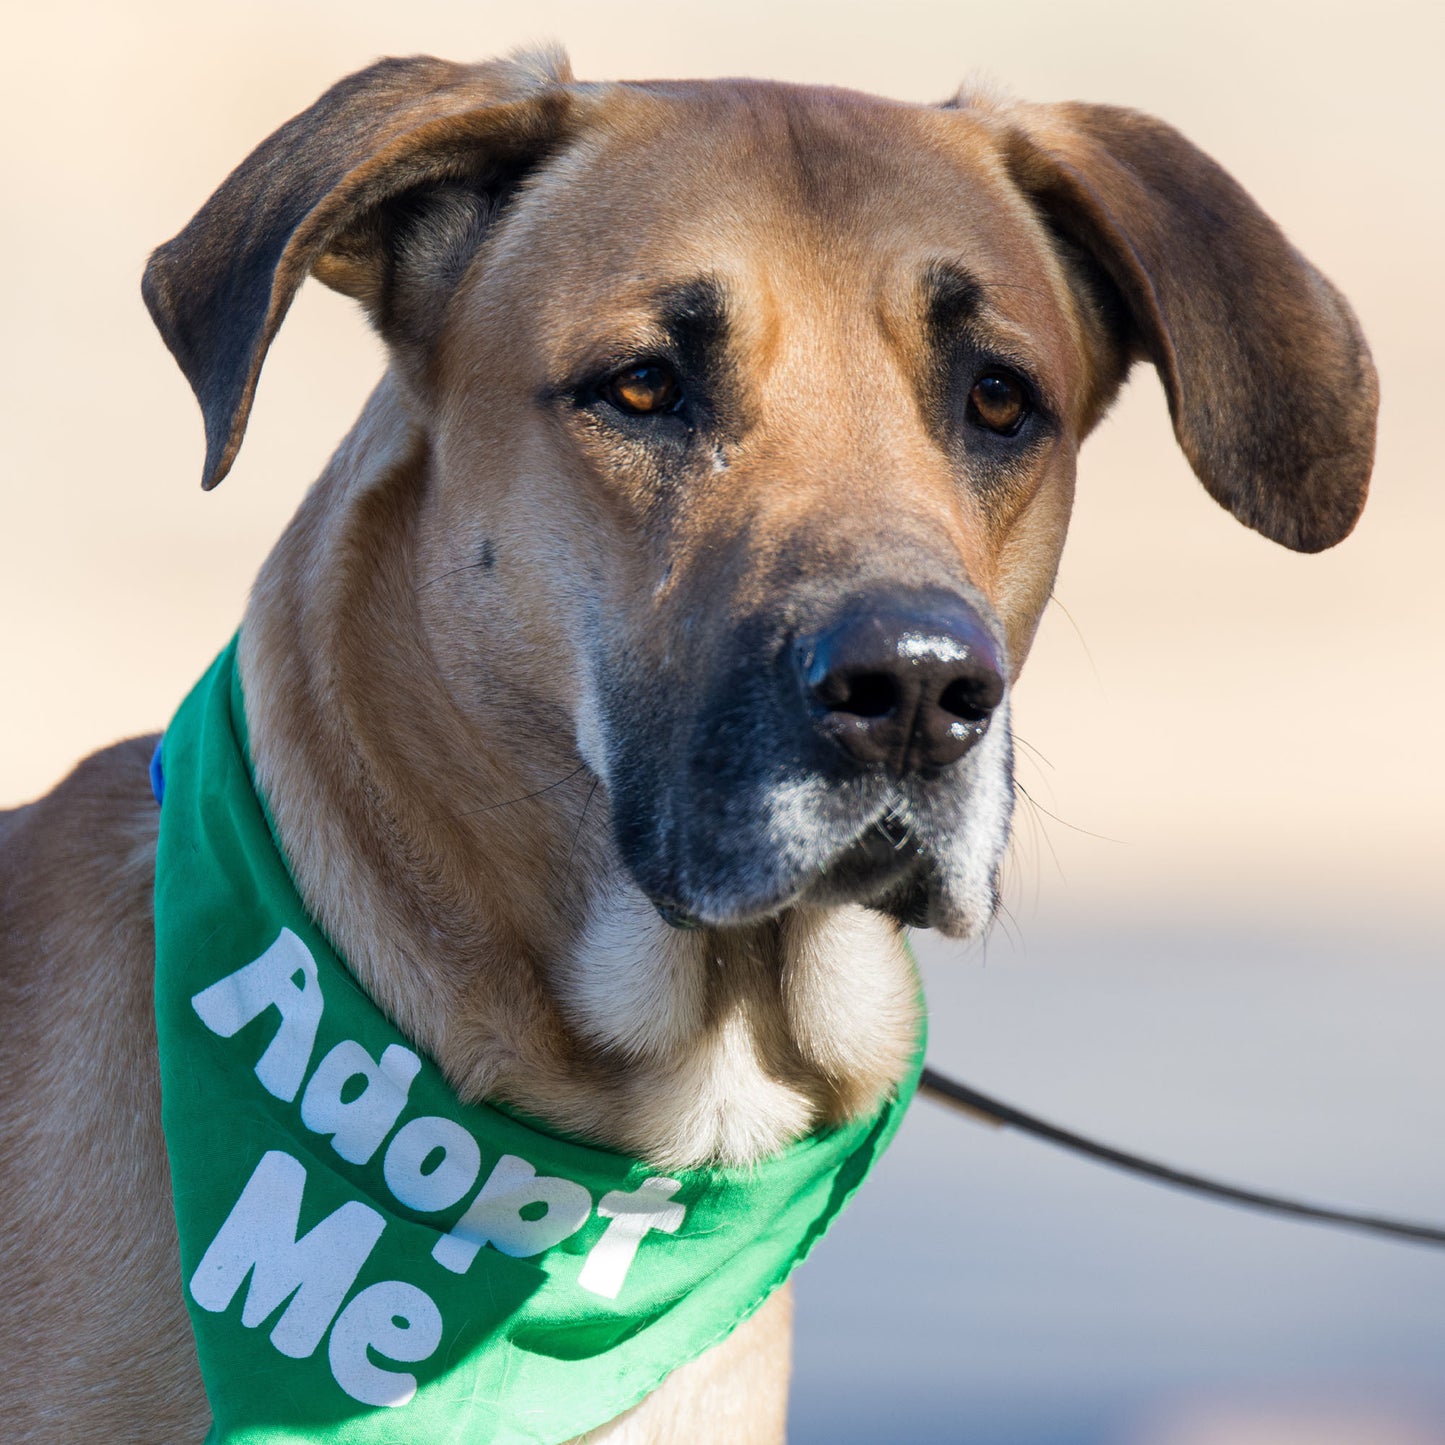 Encourage Adoption By Sending Bandanas & Vests to Furry Friends